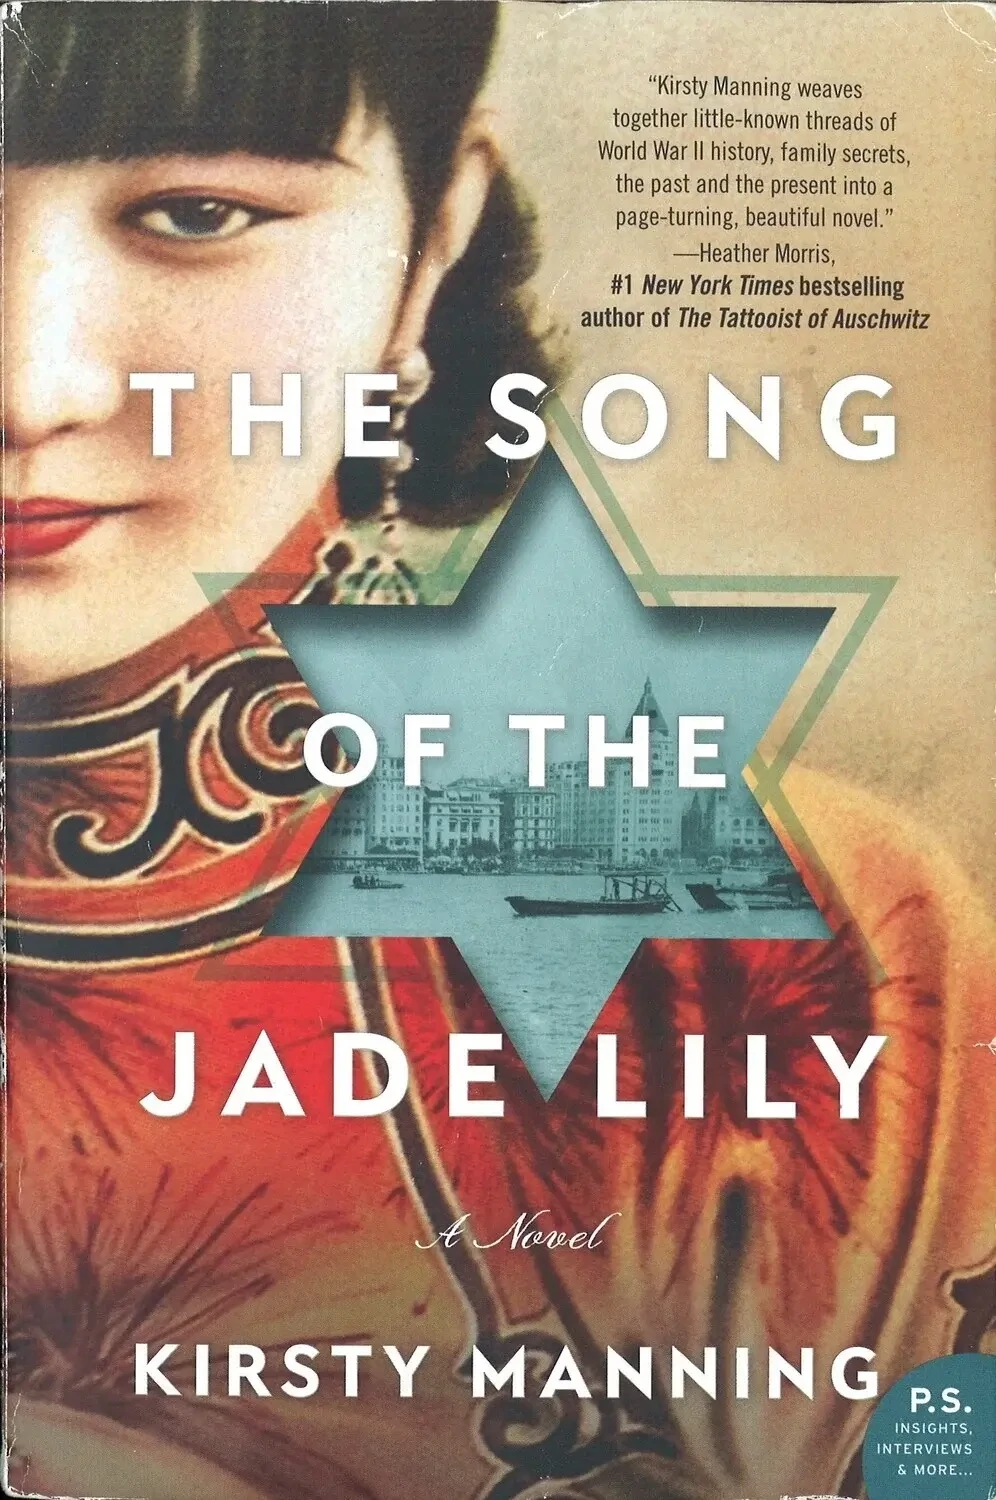 The Song of the Jade Lily by Kristy Manning